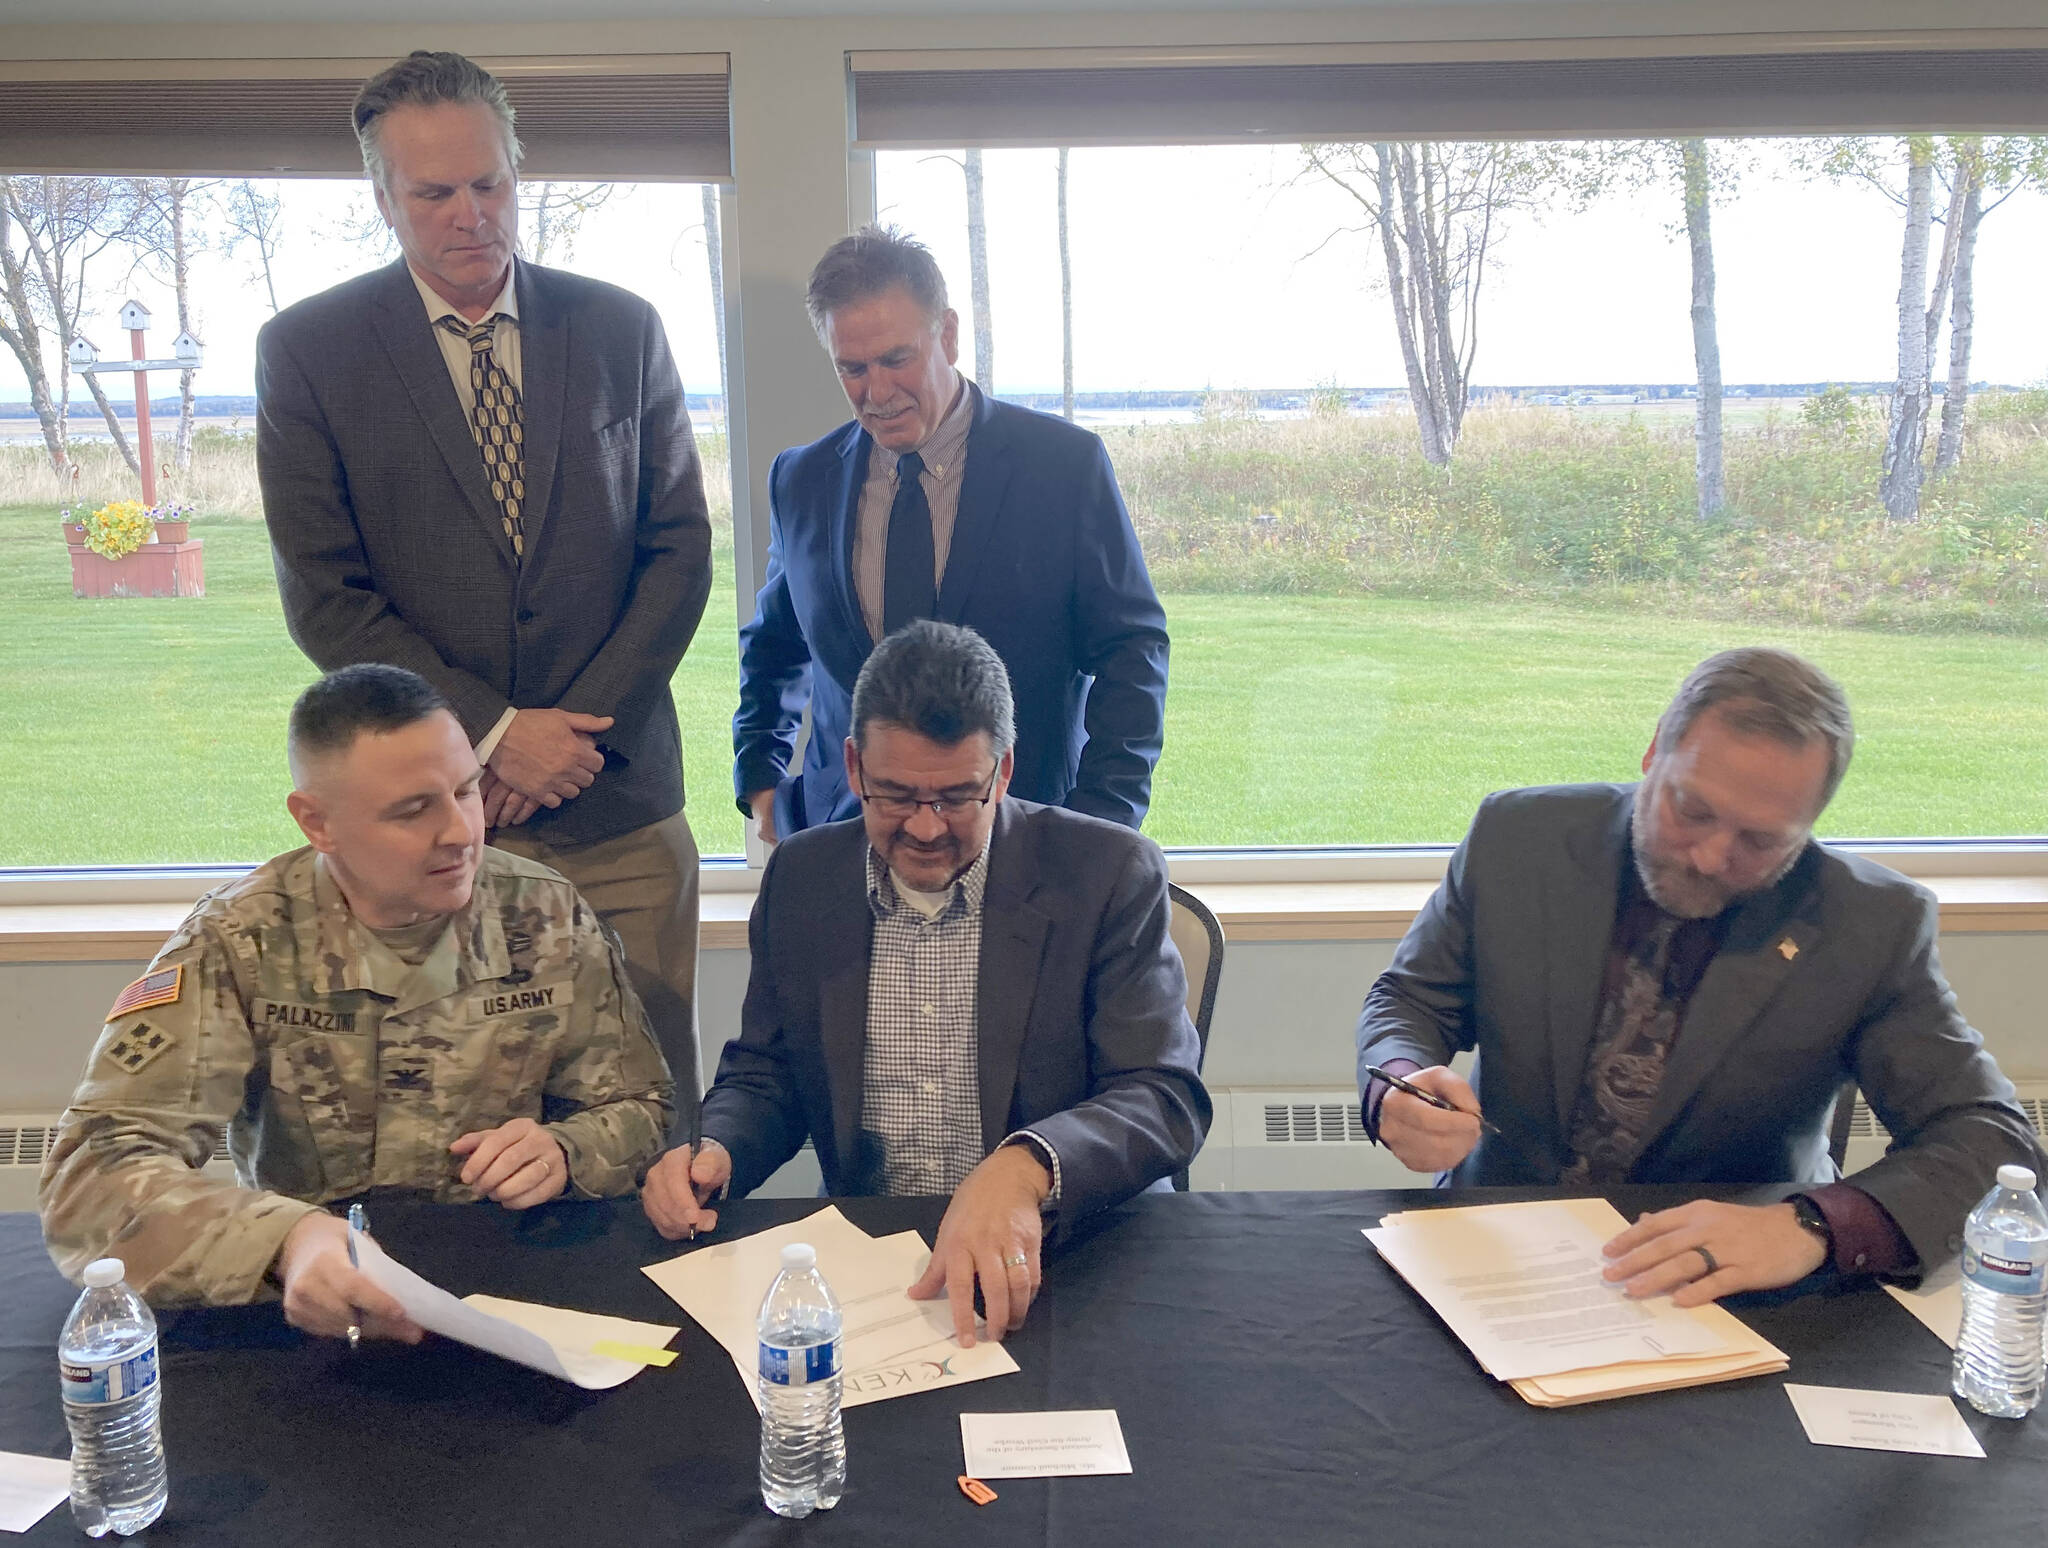 Clockwise from bottom left: U.S. Army Corps of Engineers Alaska Division Commander Col. Jeff Palazzini, Gov. Mike Dunleavy, Kenai Mayor Brian Gabriel, Kenai City Manager Terry Eubank and Assistant Secretary of the Army for Civil Works Michael Connor participate in a signing ceremony for a project partnership agreement for the Kenai Bluff Stabilization Project at the Kenai Senior Center on Monday, Sept. 25, 2023, in Kenai, Alaska. (Jeff Helminiak/Peninsula Clarion)